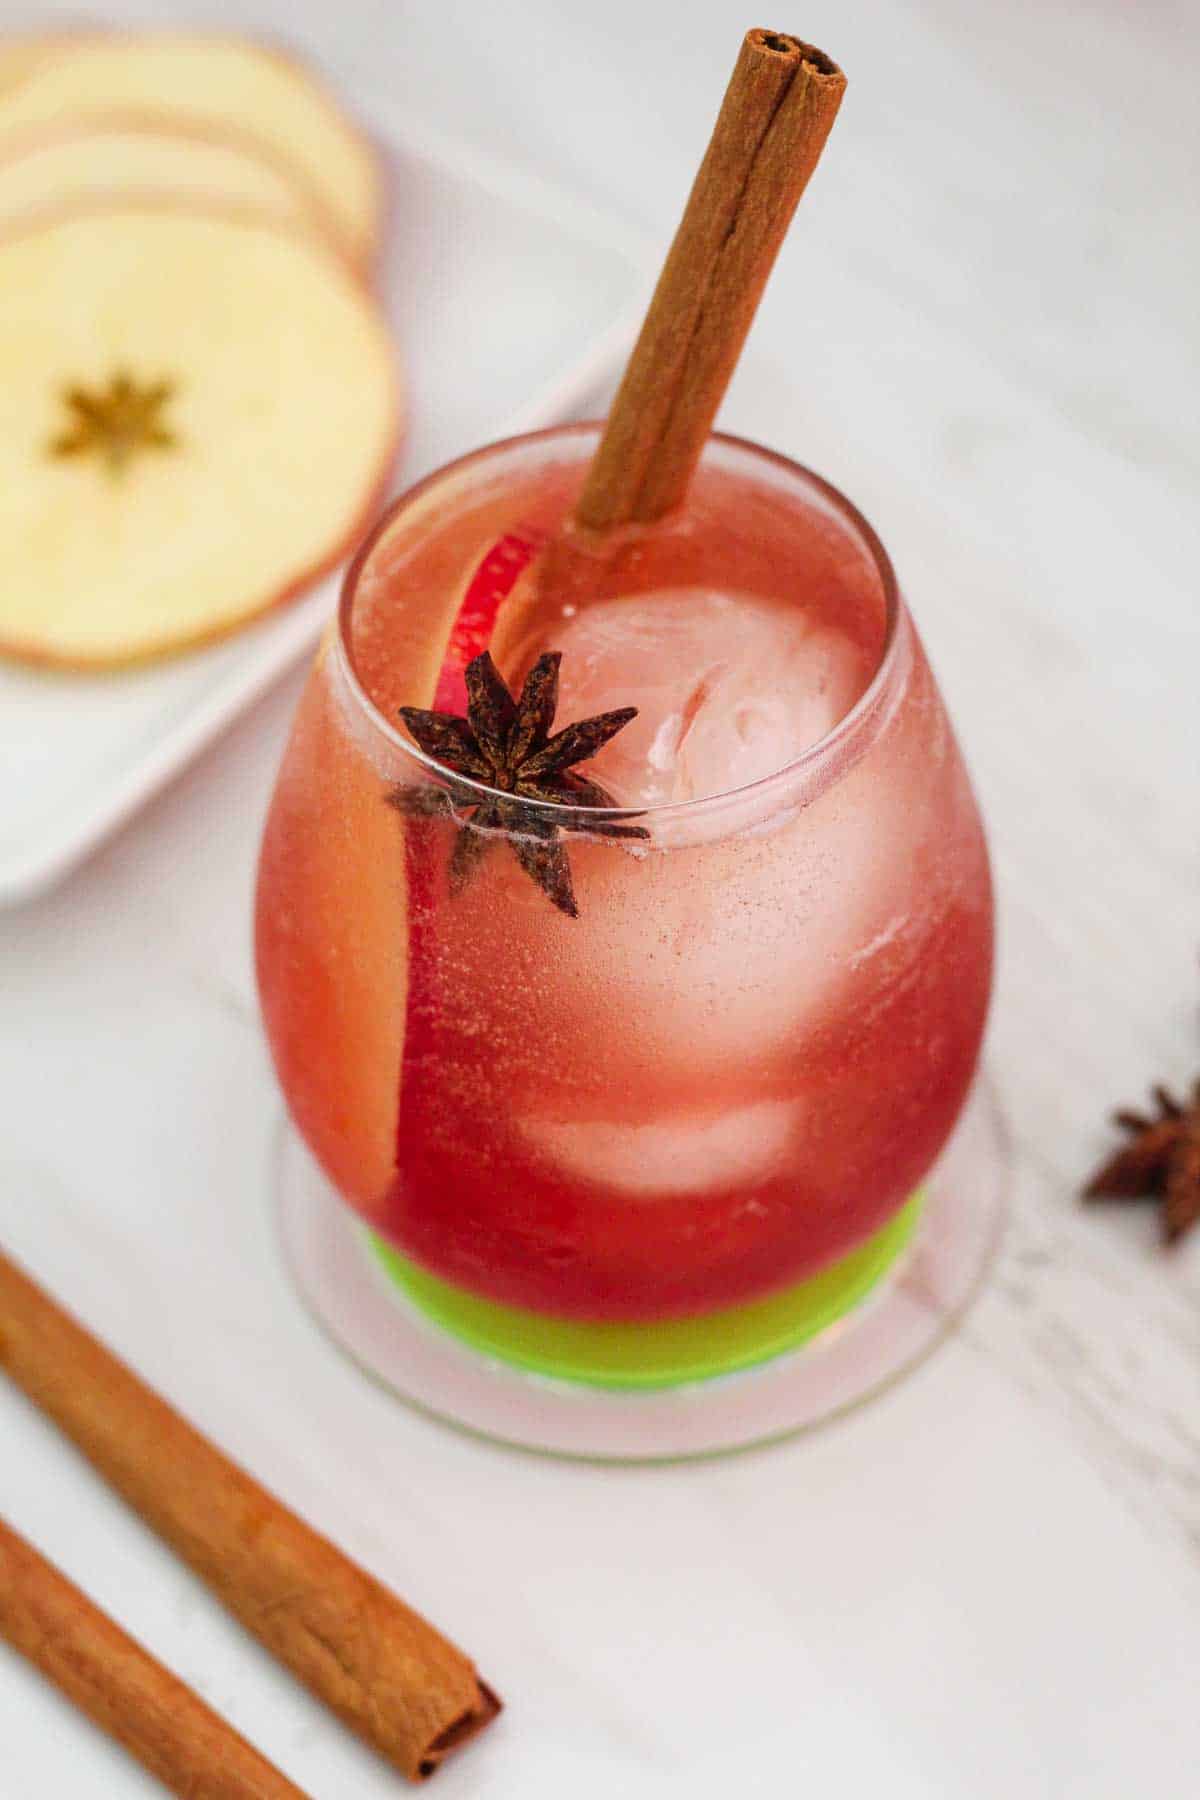 A cocktail with ice, apple slice, star anise and cinnamon stick. There are garnishes around the cocktail glass, like more apple slices, cinnamon sticks etc.